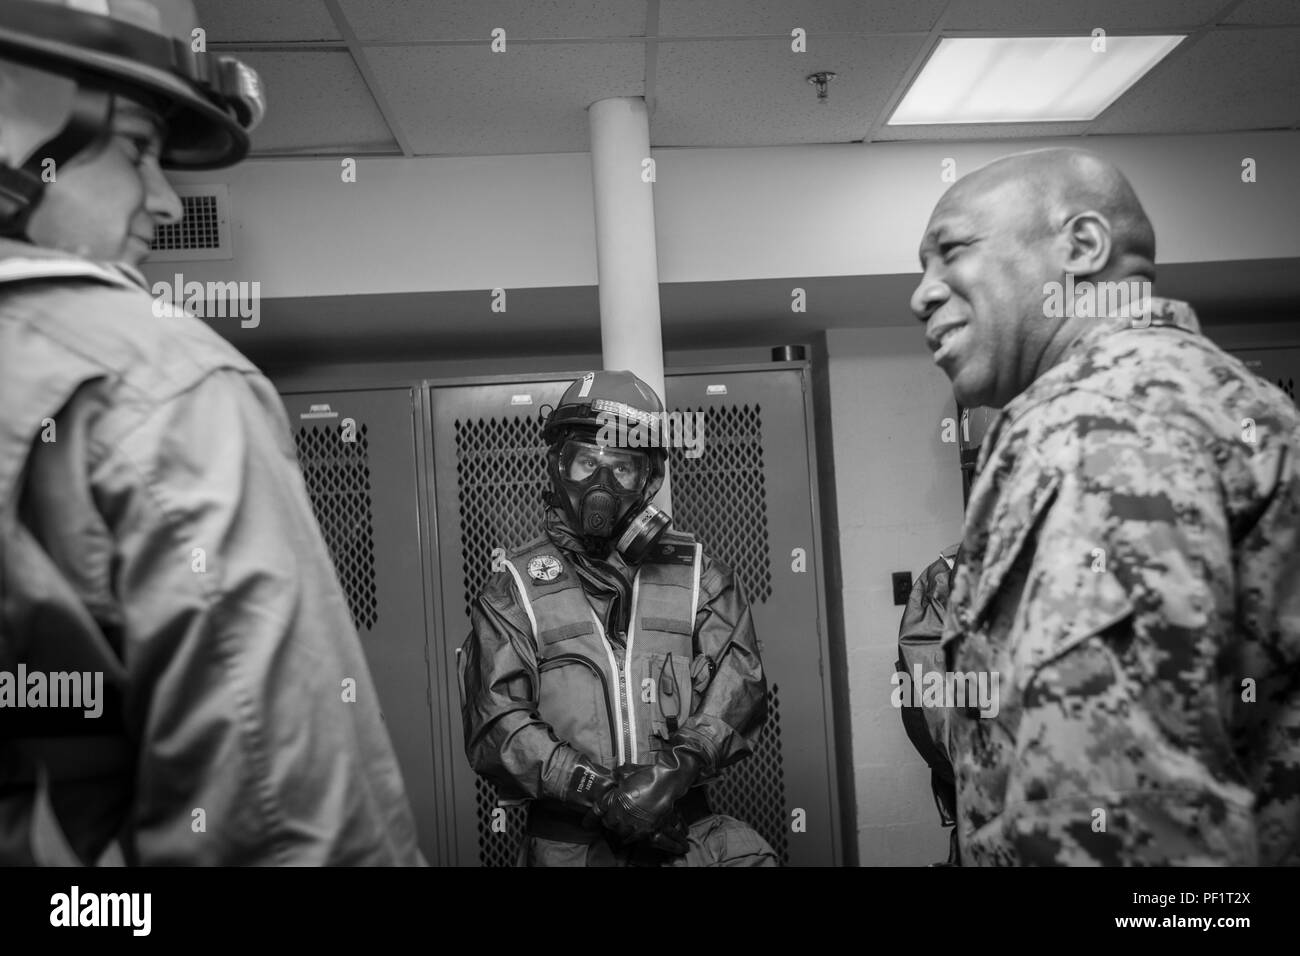 The 18th Sergeant Major of the Marine Corps, Ronald L. Green, visits Marines assigned to Chemical Biological Incident Response Force (CBIRF) aboard Naval Support Facility Indian Head, Md., Feb. 18, 2016. The mission of CBIRF is to respond to a chemical, biological, radiological, nuclear or high-yield explosive threat or event in order to assist local, state, or federal agencies and the geographical combatant commanders.  (U.S. Marine Corps photo by Sgt. Melissa Marnell, Office of the Sergeant Major of the Marine Corps/Released) Stock Photo